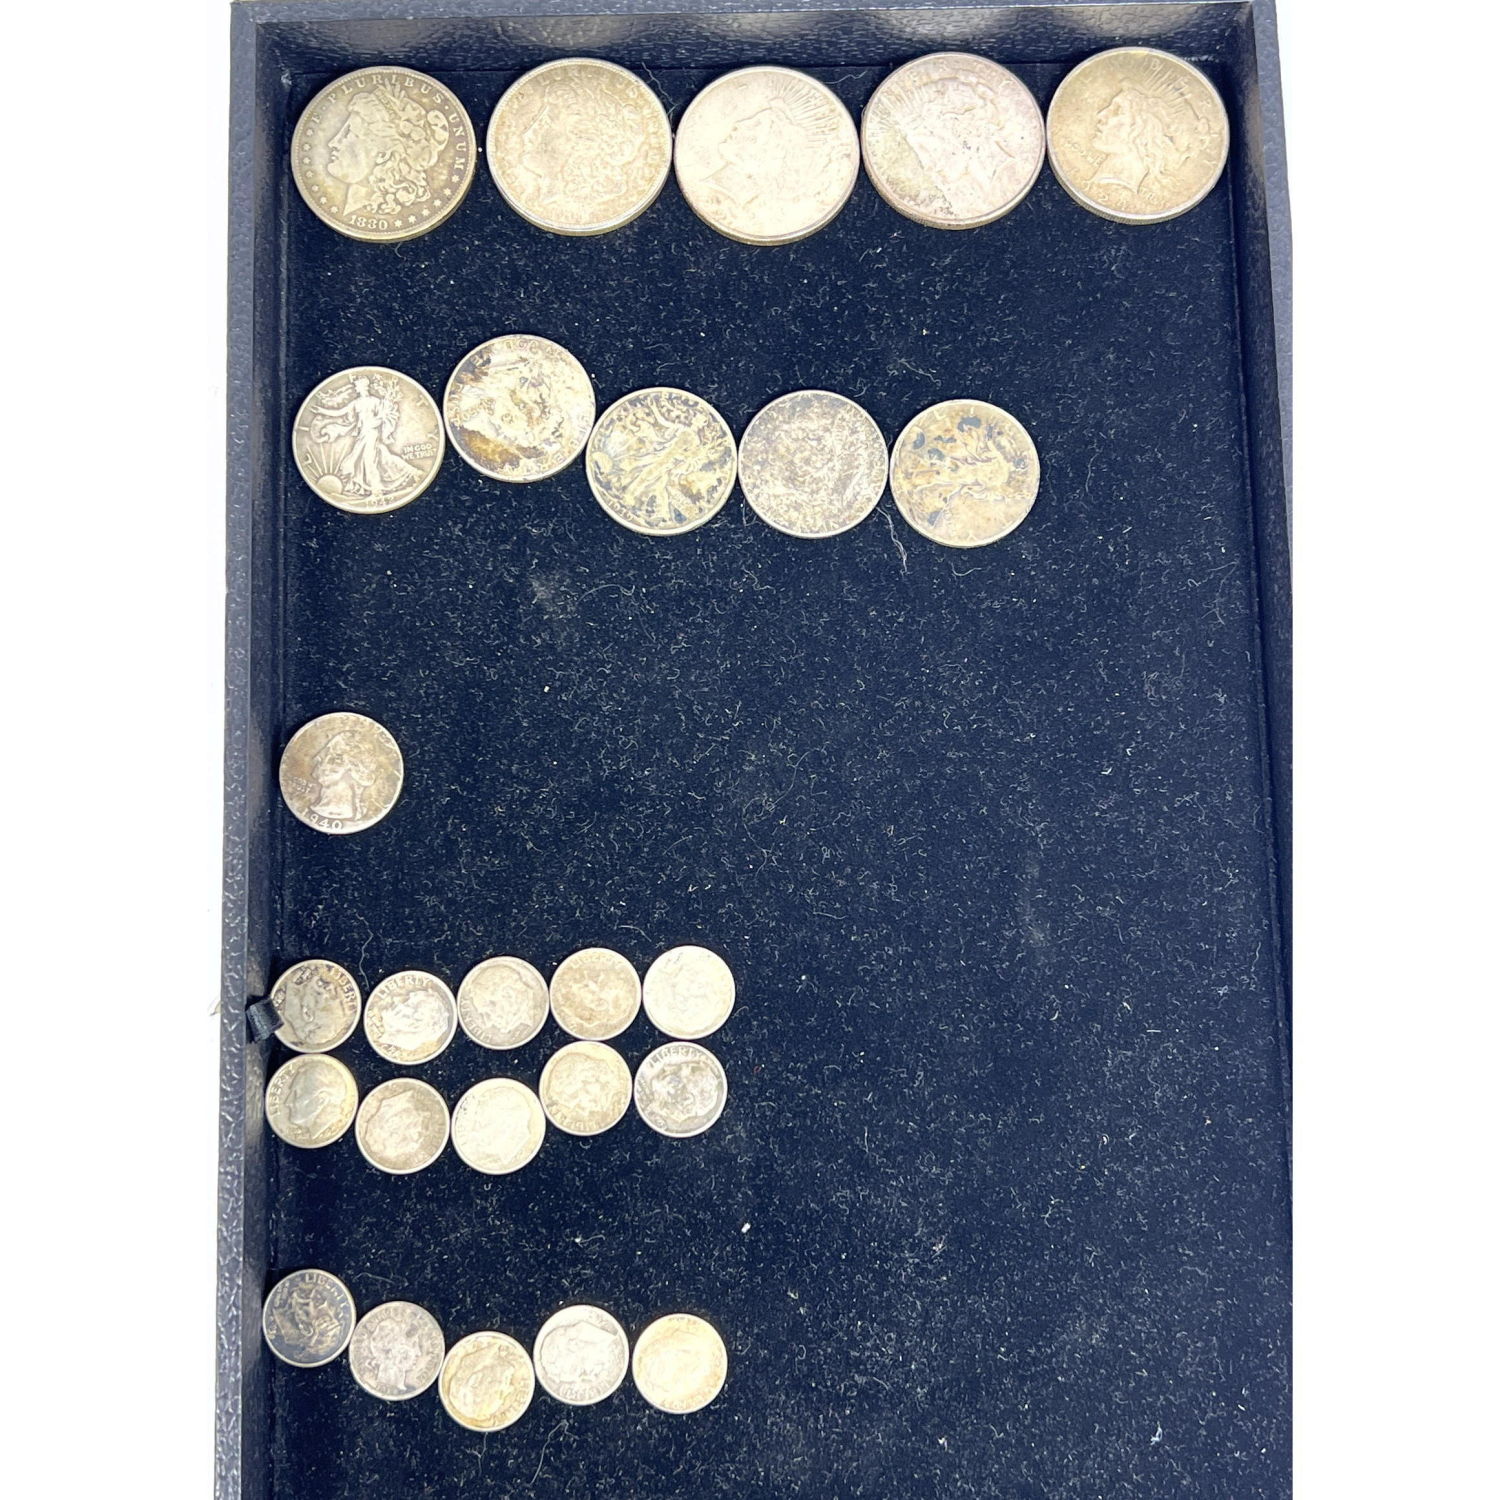 9 25 usd face value silver coinage  2fed01